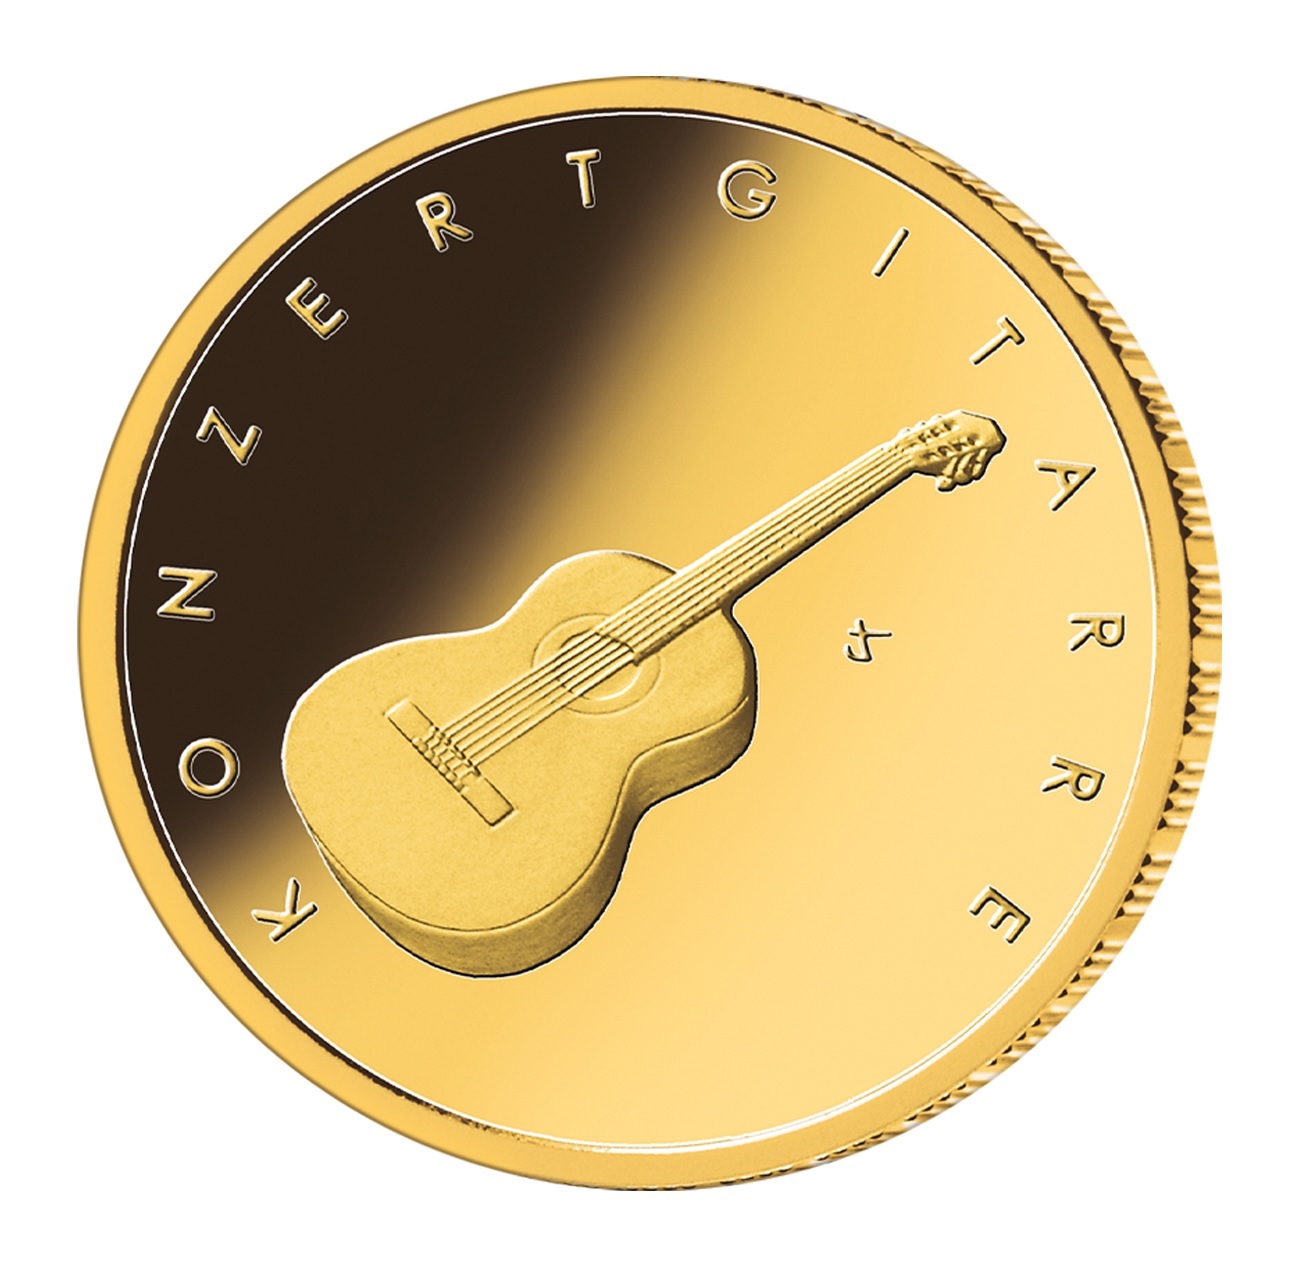 (EUR03.Proof.2022.SGM2201M44S5) 50 euro Germany 2022 F BU gold - Concert guitar Reverse (zoom)